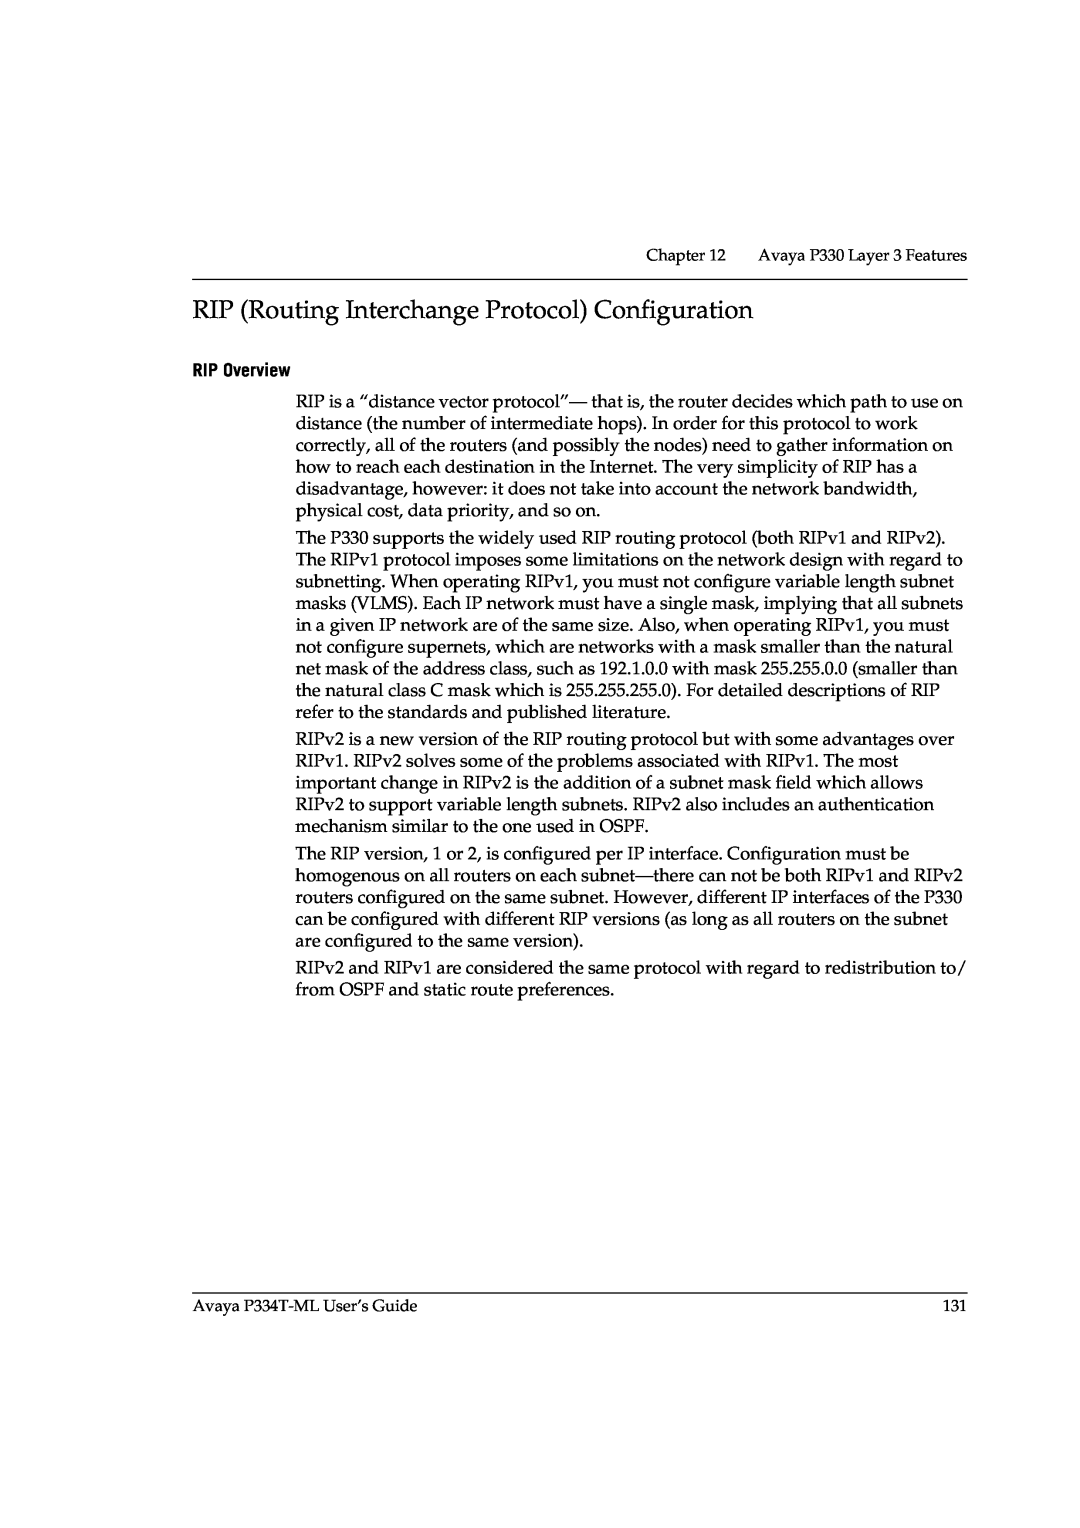 Avaya P3343T-ML manual RIP Routing Interchange Protocol Configuration, RIP Overview 